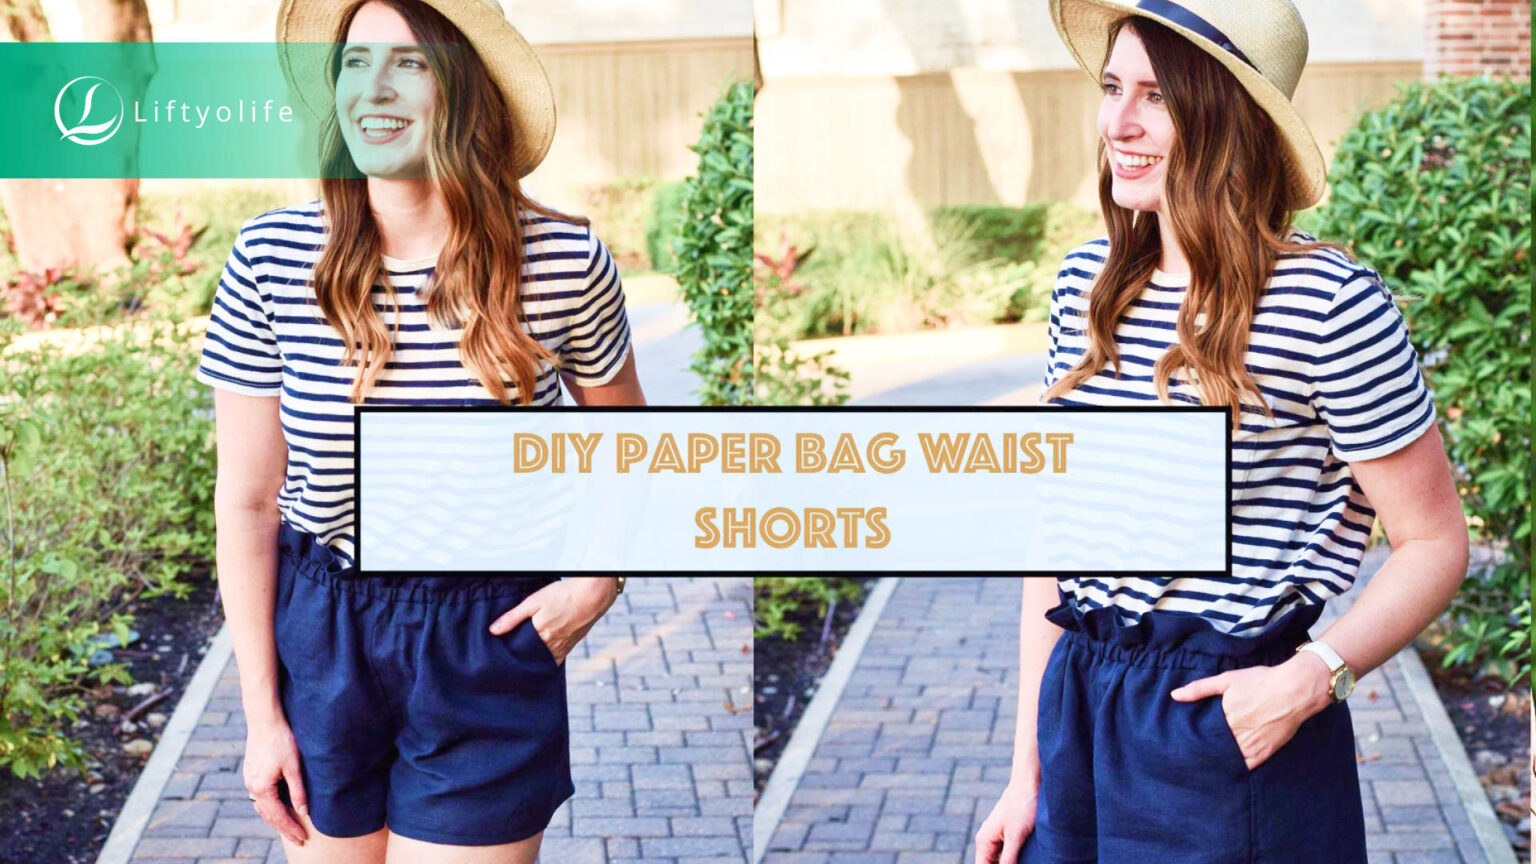 How To Wear Paperbag Shorts | Liftyolife.com